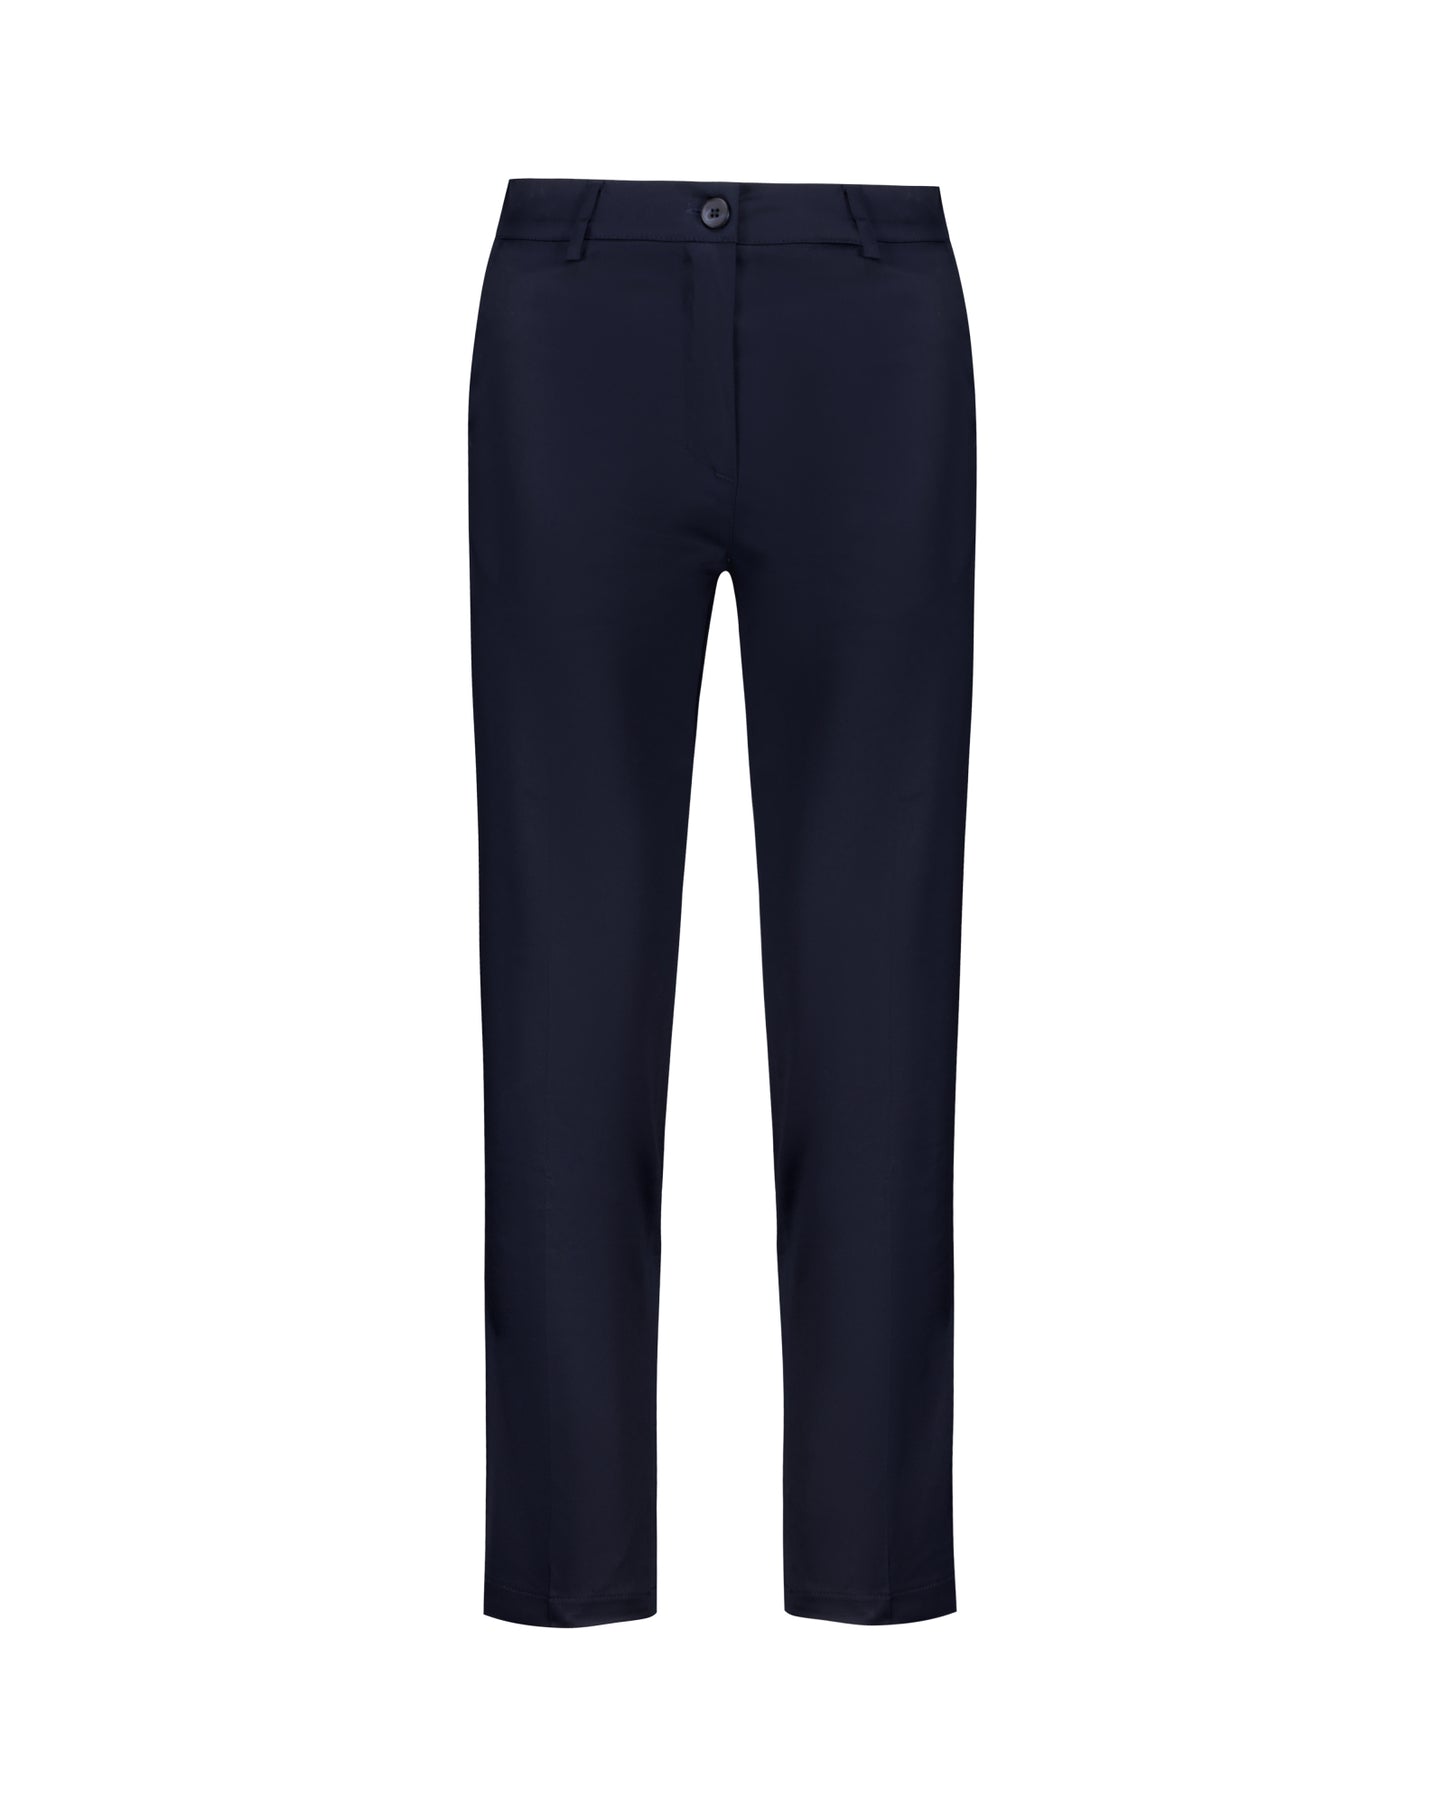 Milson Carrie Pant - Navy